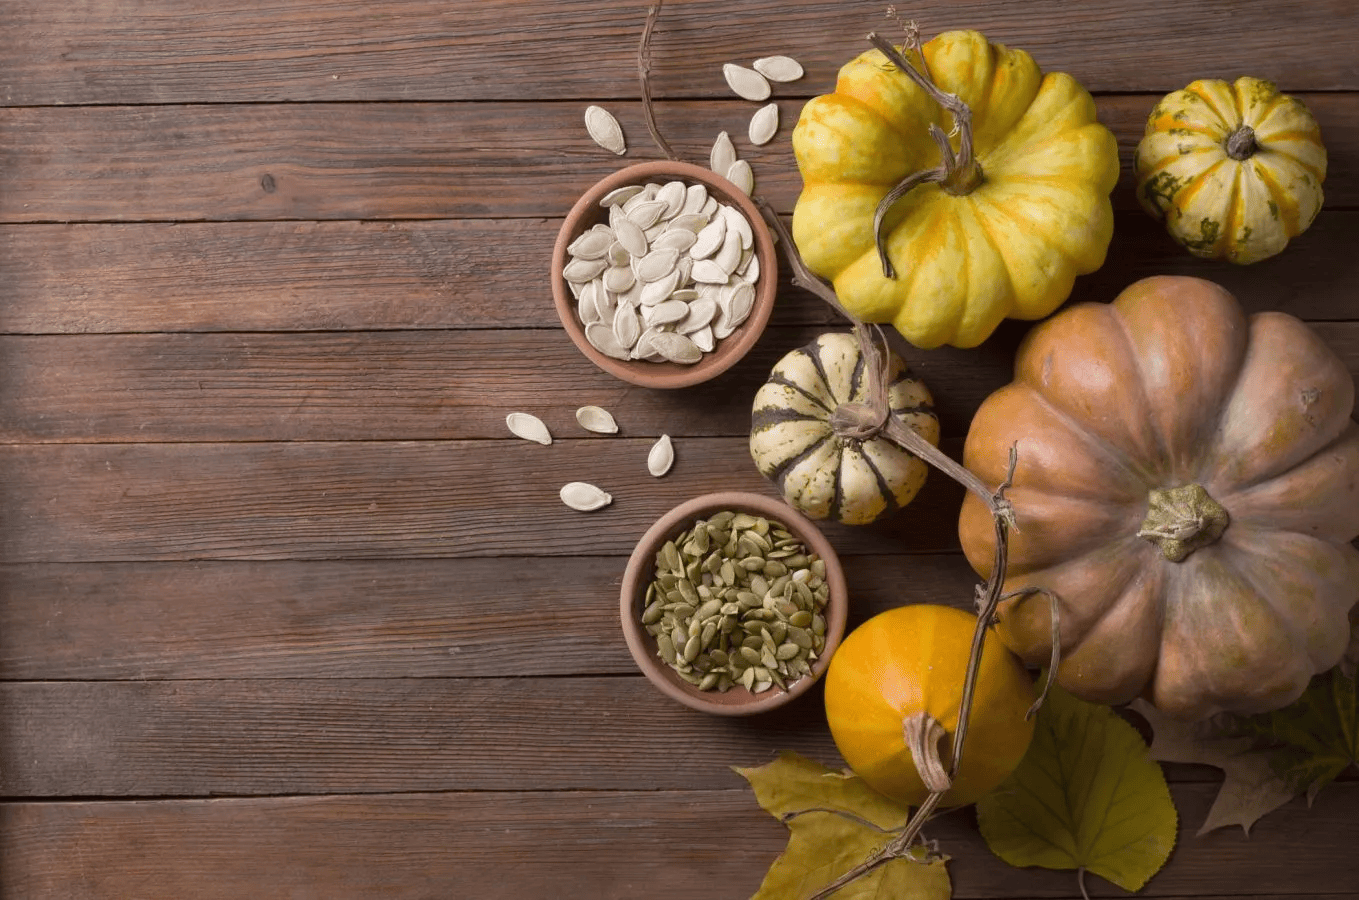 Why Pumpkin Seeds Should Be Your Go-To Snack – Health Benefits Revealed